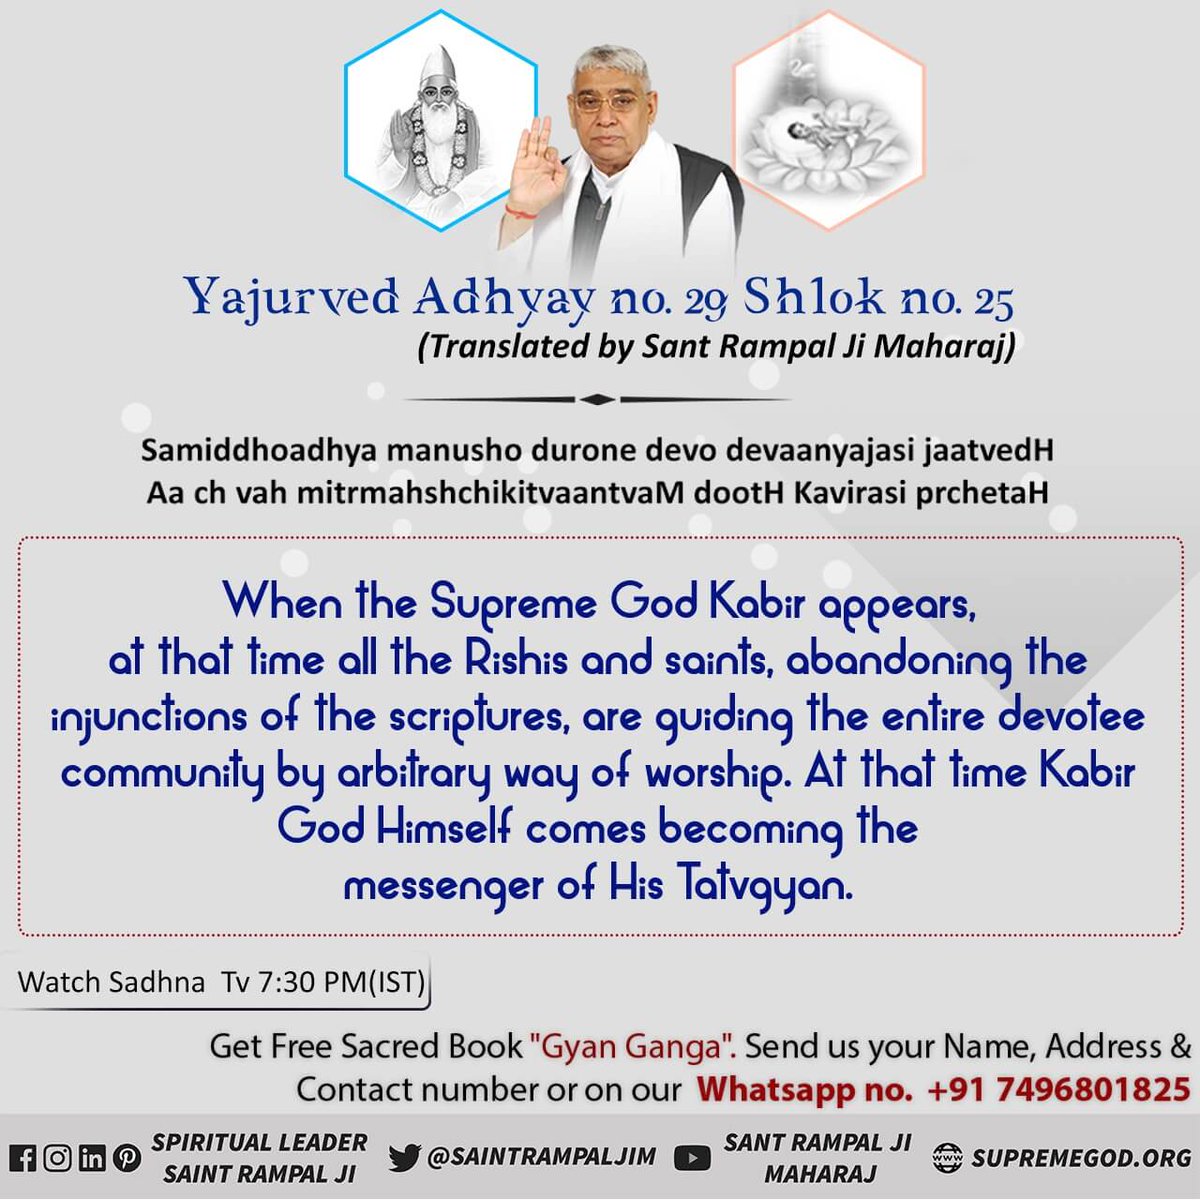 #GodNightMonday
Yajurved Adhyay no. 29 Shlok no. 26
When the Supreme God Kabir appears,
at that time all the Rishis and Saintse, abandoning the injections of the scriptures, are guiding the entire devotee community by arbitrary way of worship.
@SaintRampalJiM
#MondayMotivation